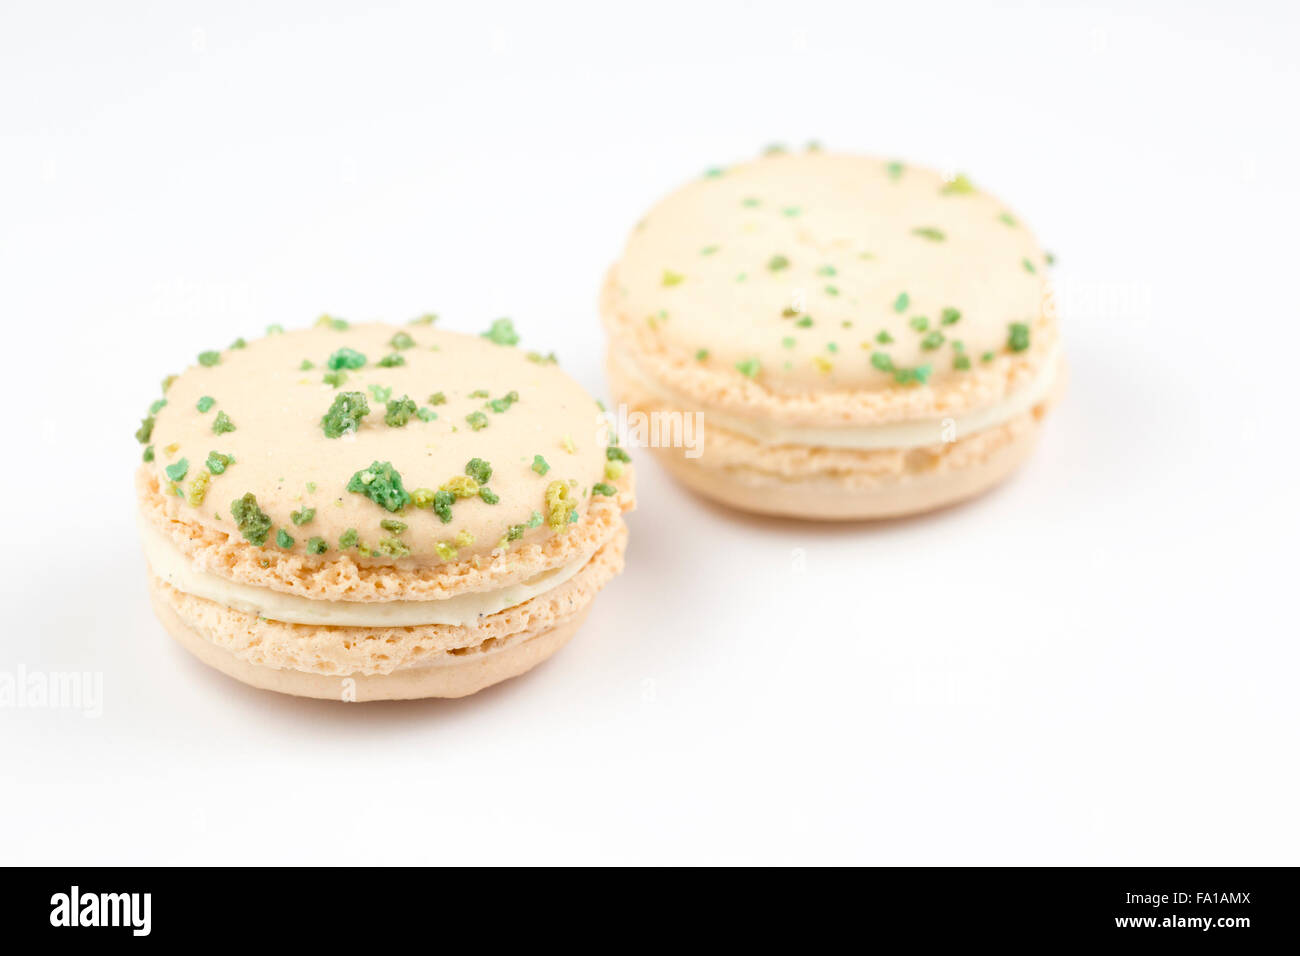 Green and white macarons, vanilla and basil flavor, on a white background Stock Photo